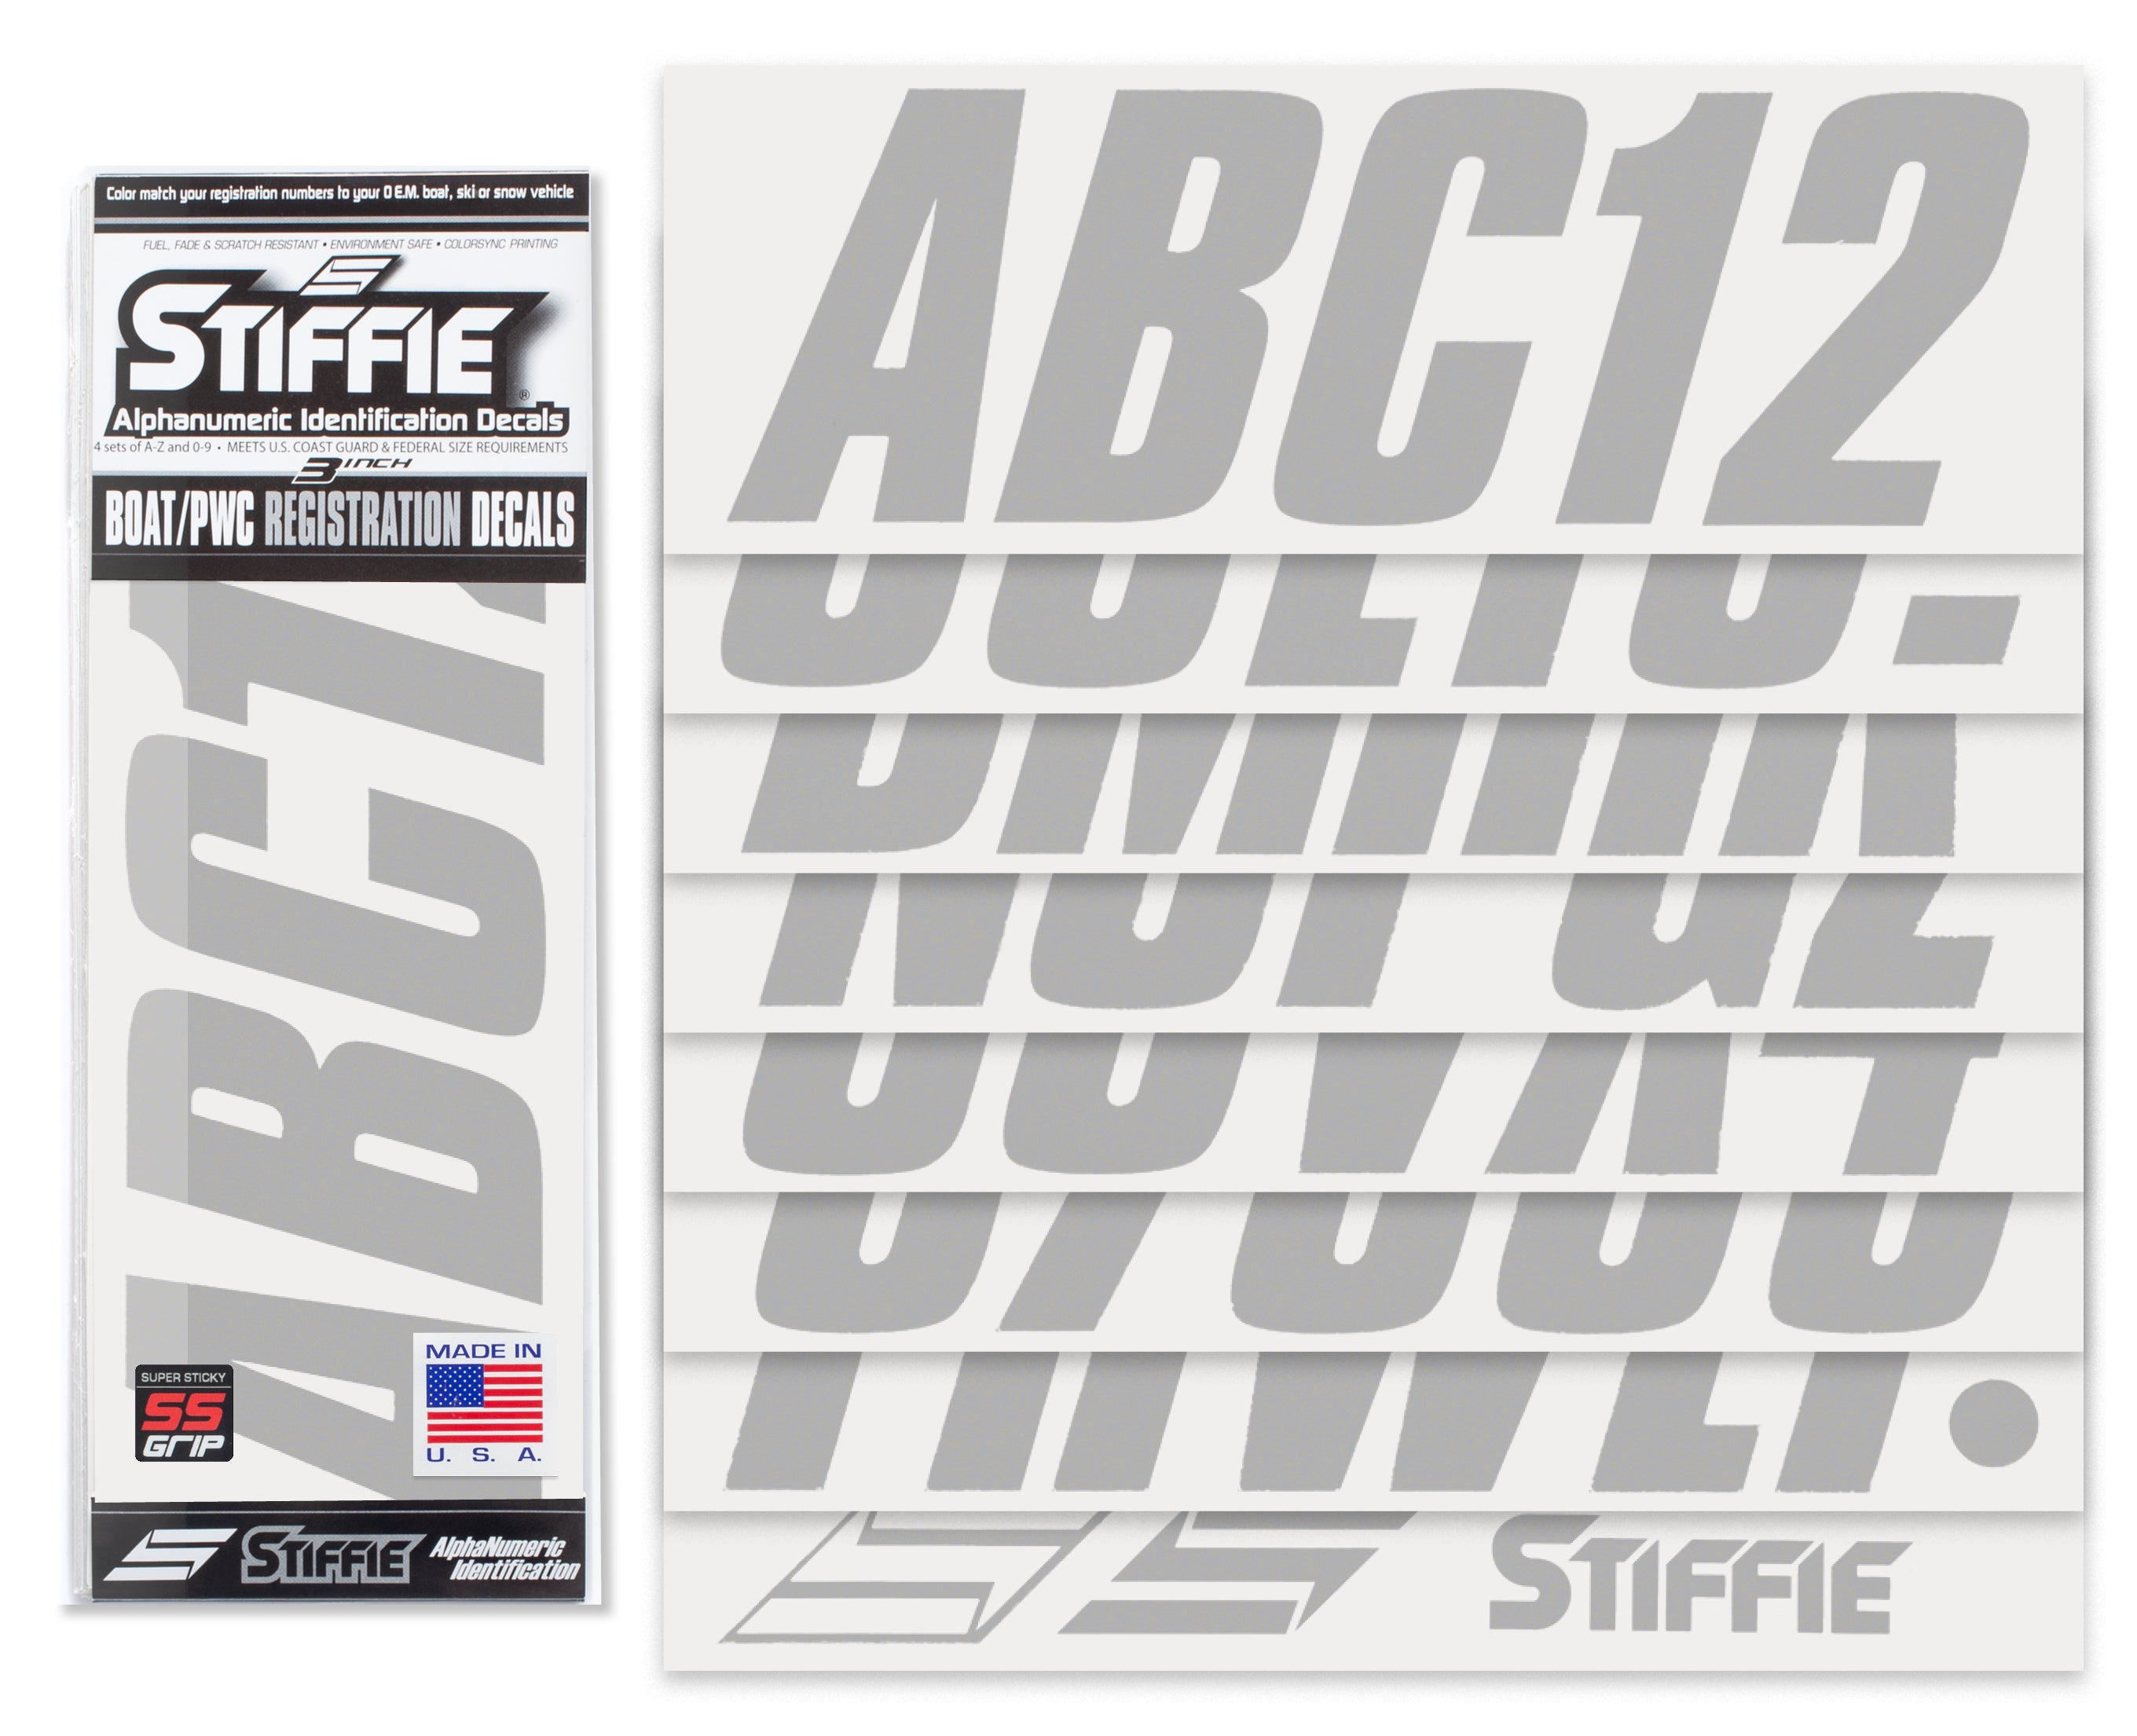 STIFFIE Shift Silver Super Sticky 3" Alpha Numeric Registration Identification Numbers Stickers Decals for Sea-Doo Spark, Inflatable Boats, Ribs, Hypalon/PVC, PWC and Boats.